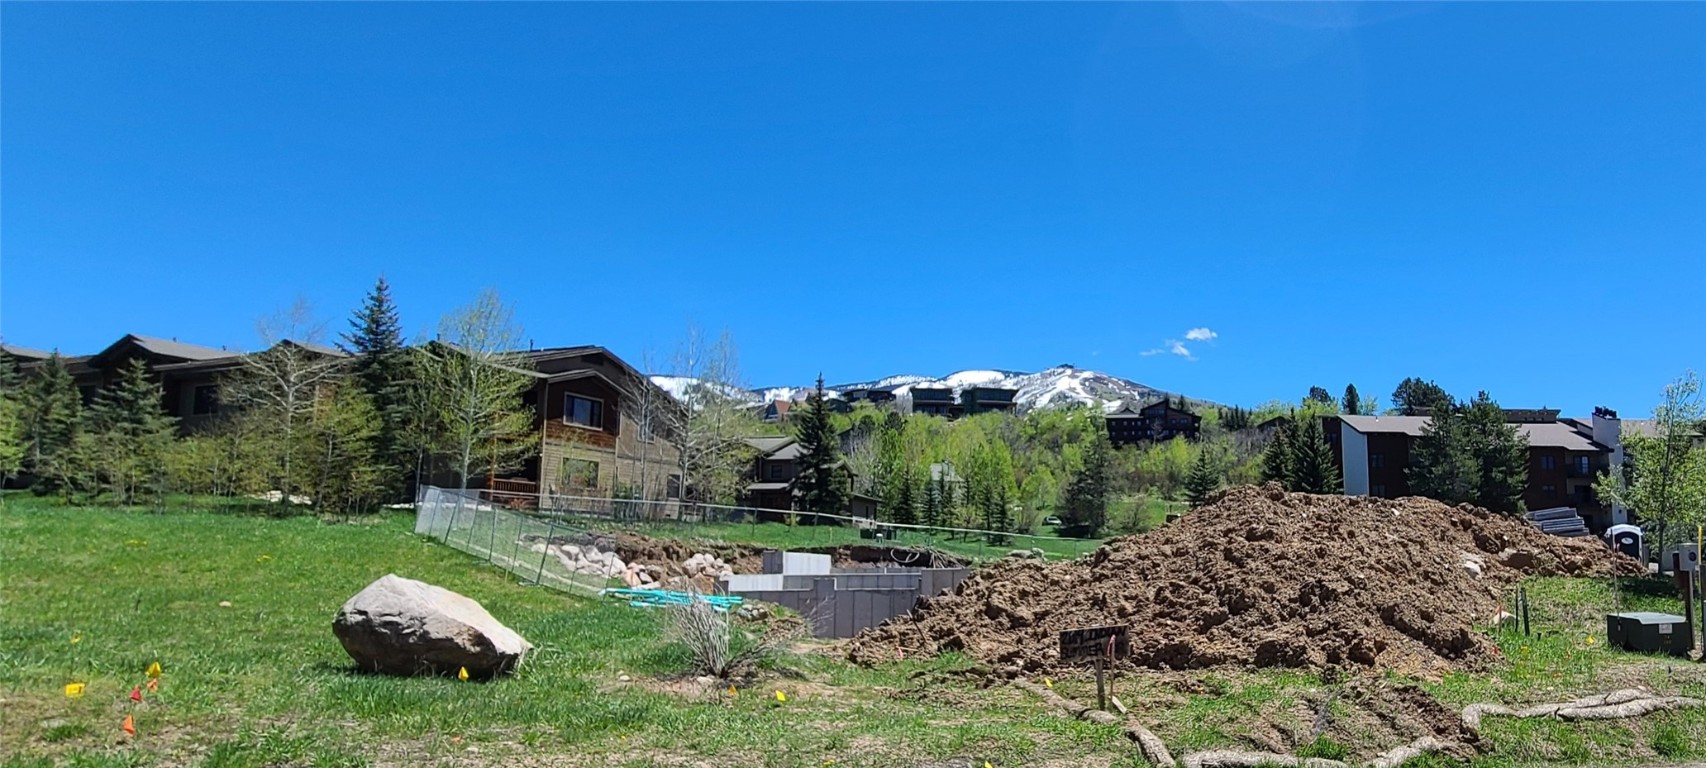 1279 & 1277 Turning Leaf Court, Steamboat Springs, CO 80487 Listing Photo  4